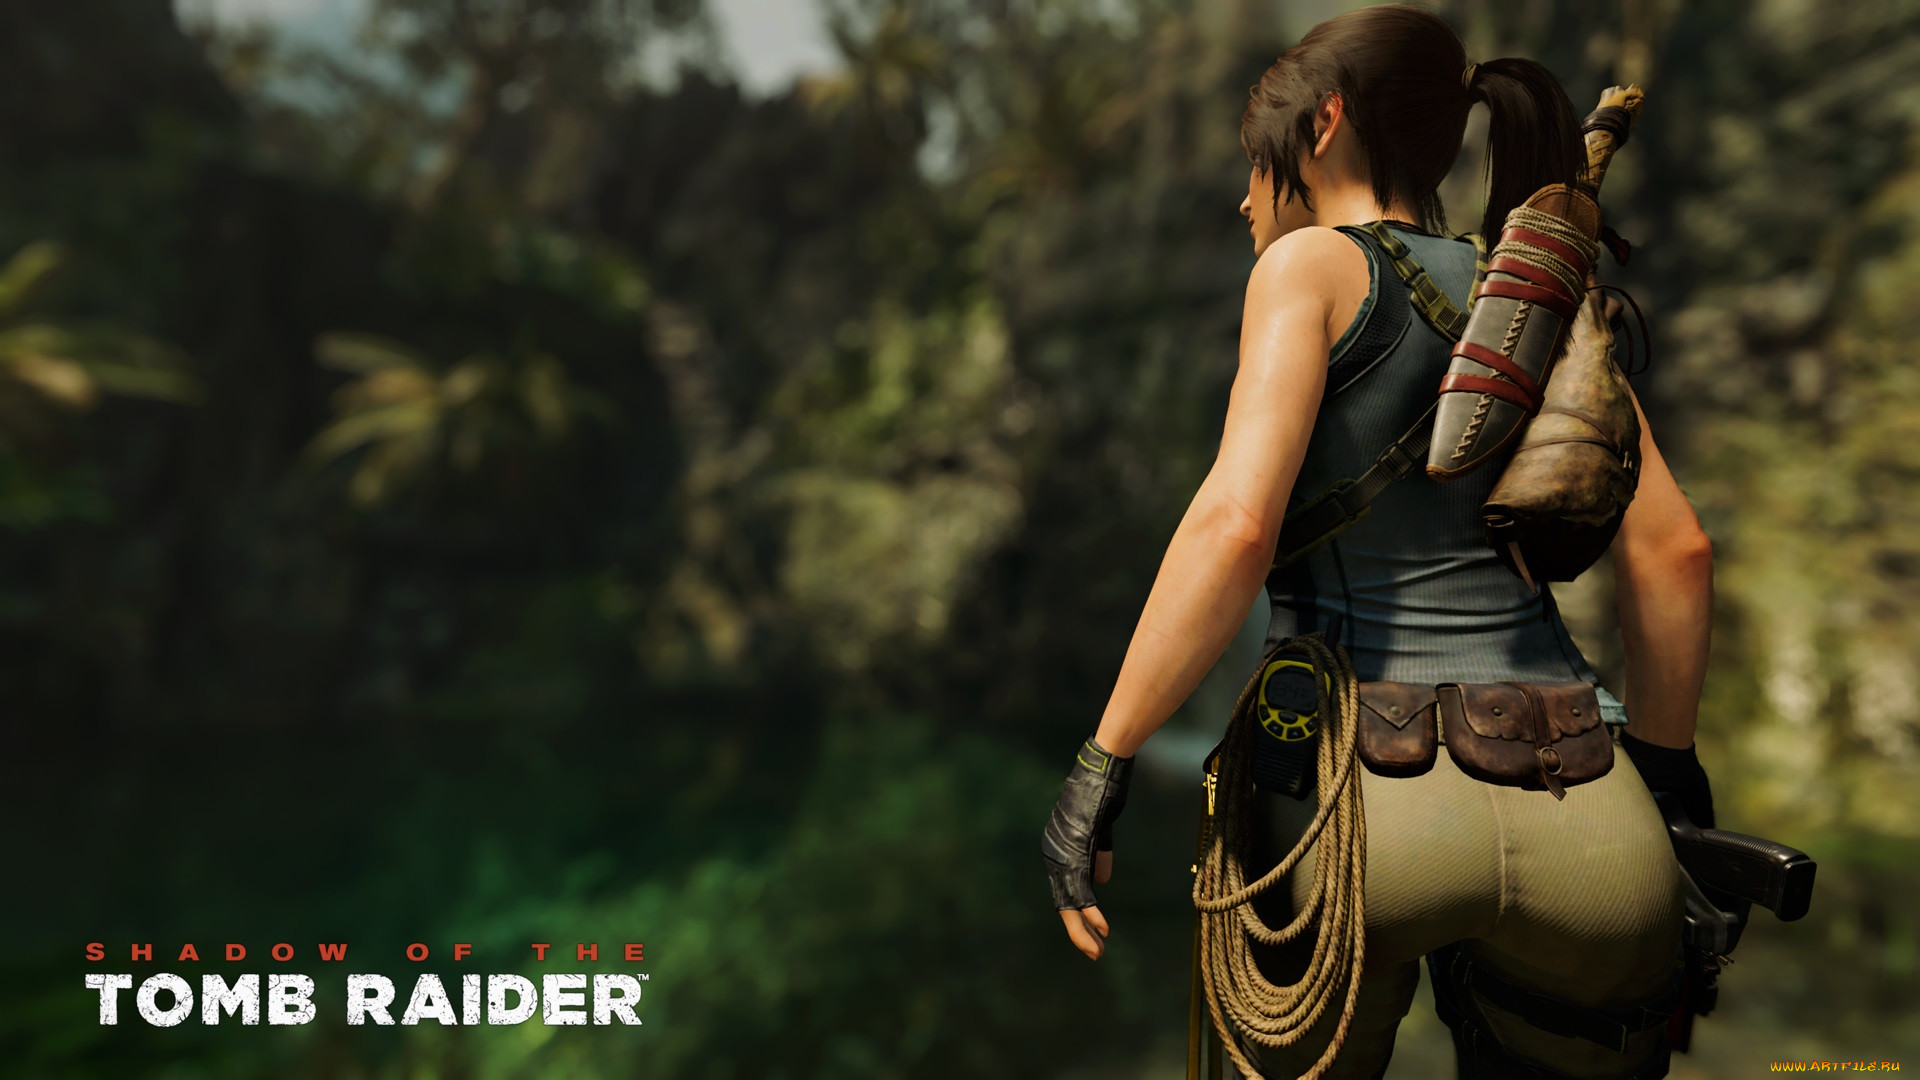  , shadow of the tomb raider, shadow, of, the, tomb, raider